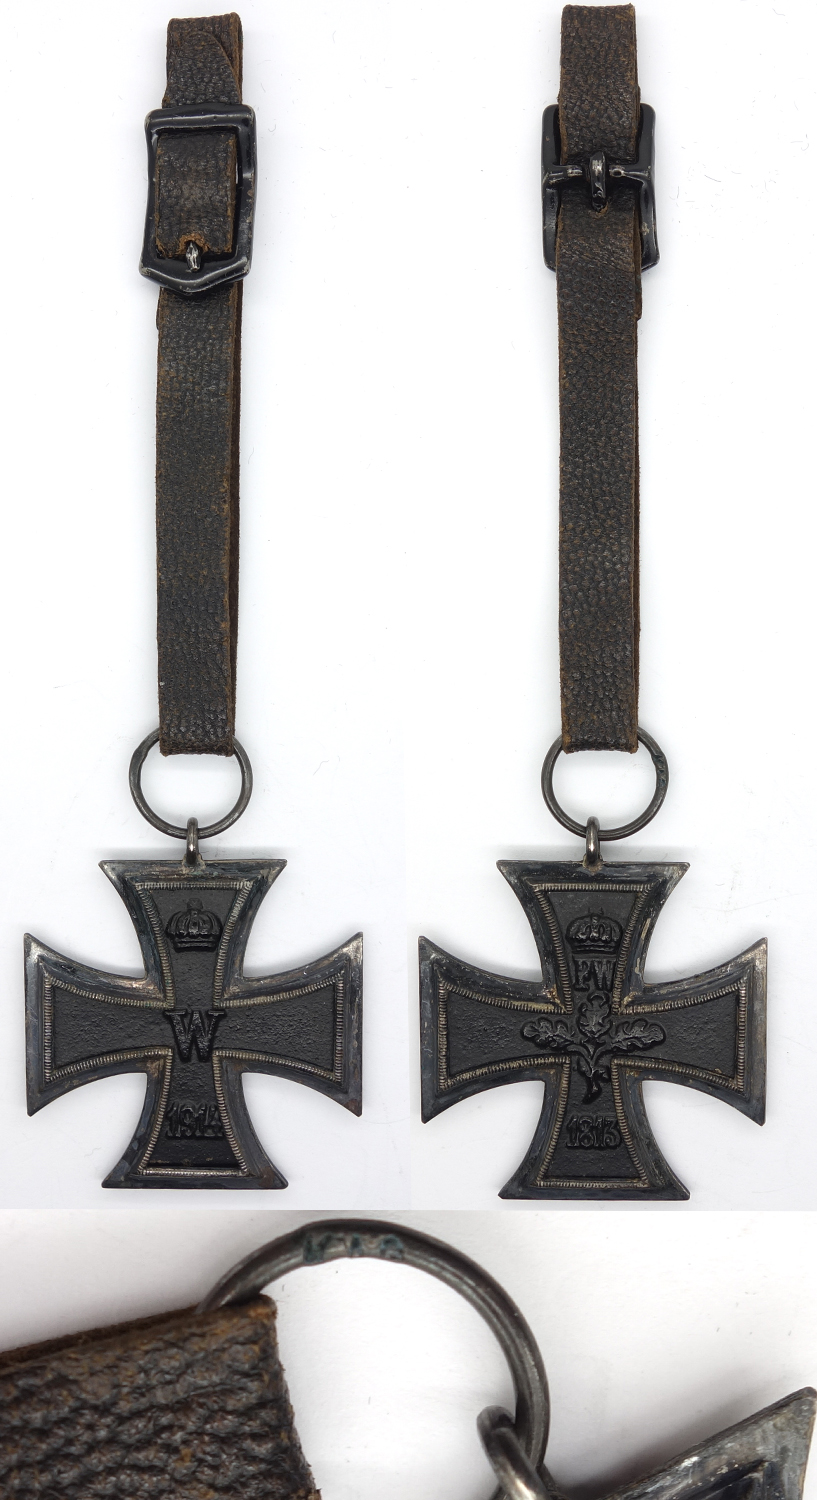 Imperial 2nd Class Iron Cross by KAG